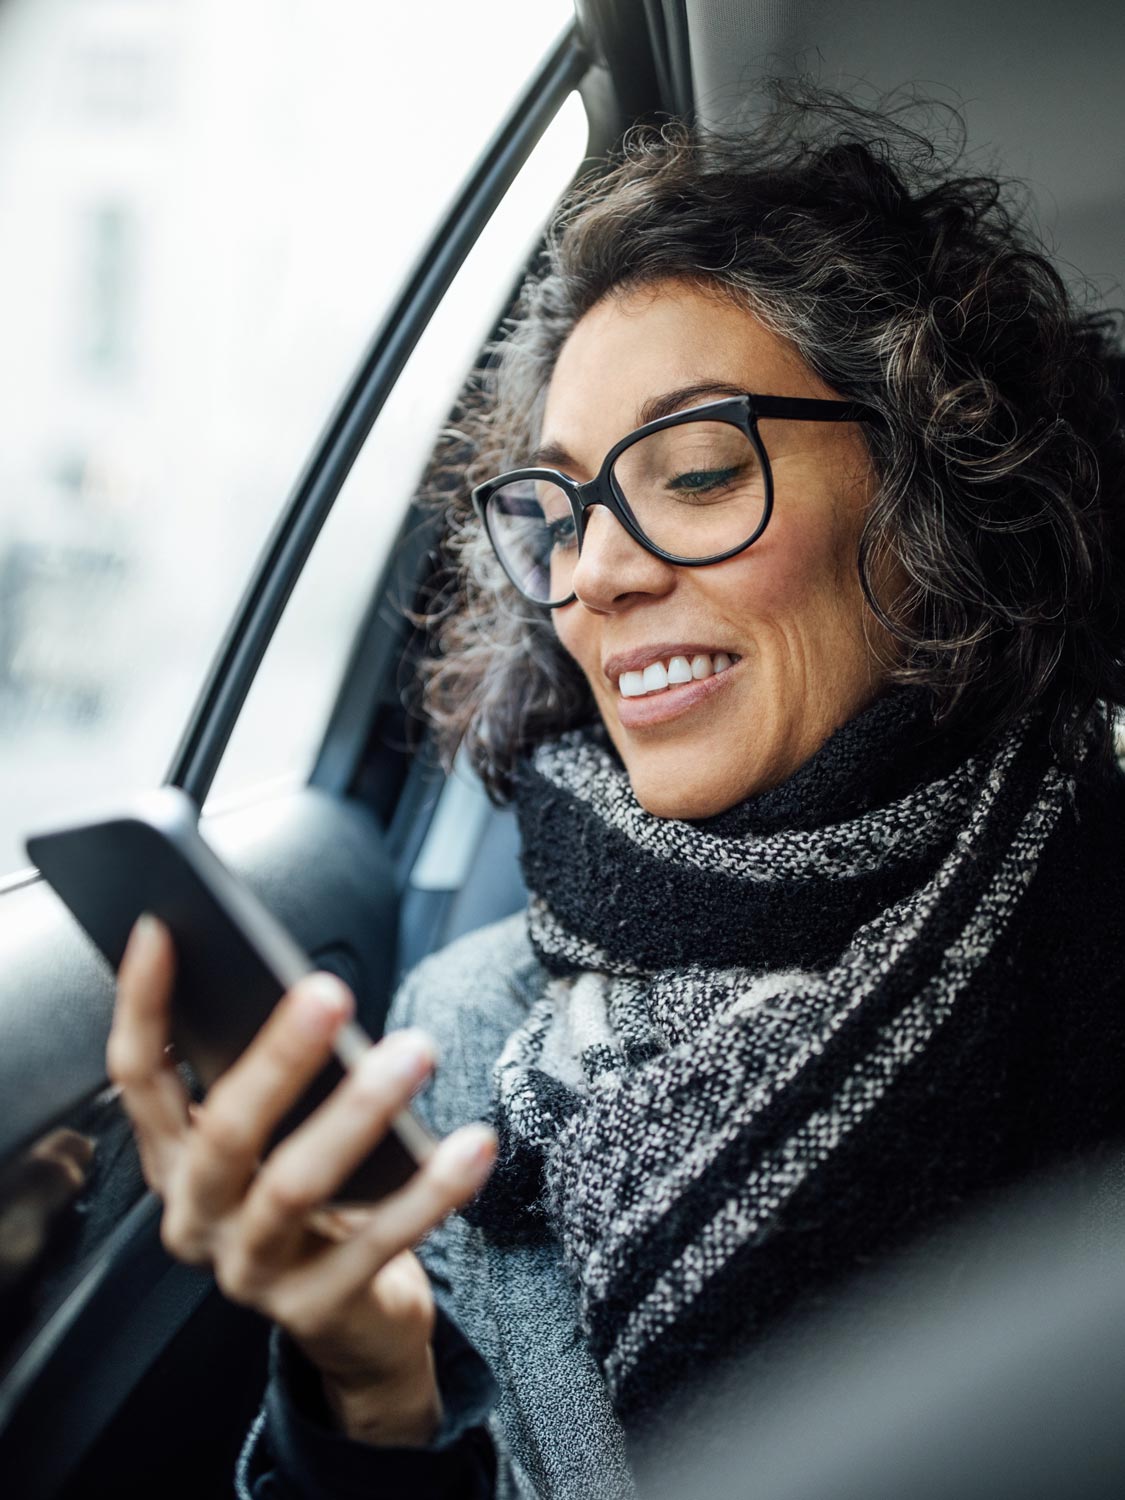 Mature woman looking at her cell phone while traveling in the backseat of a car.